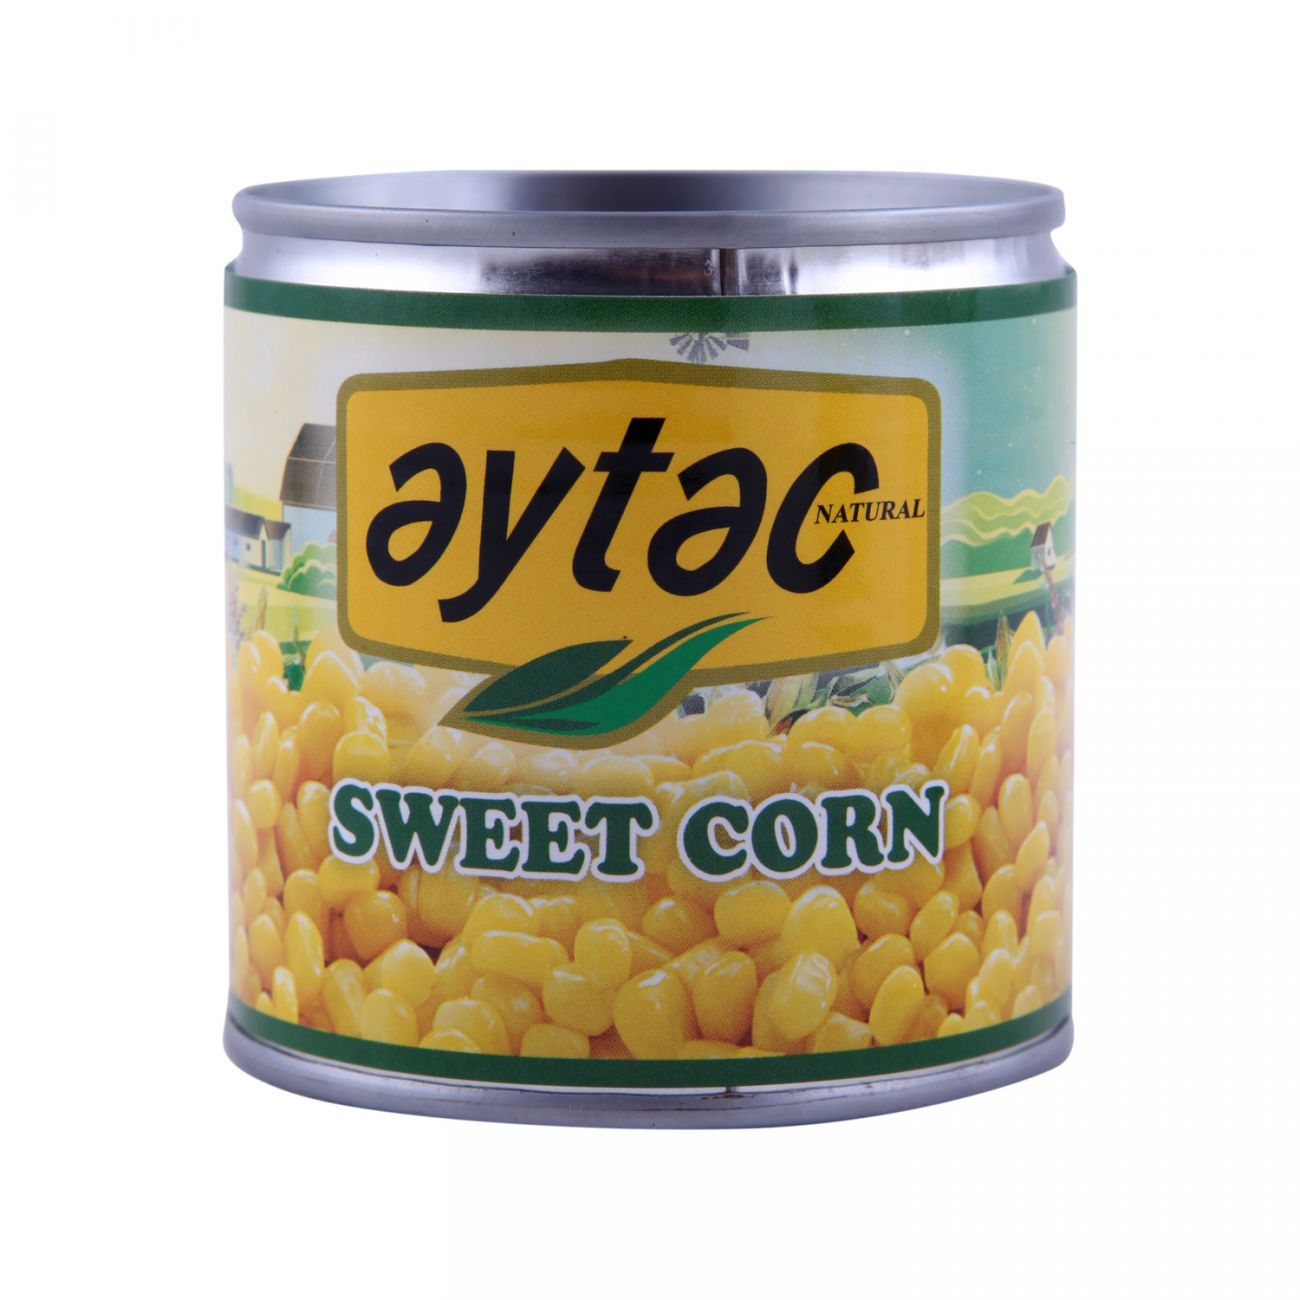 Aytac Canned Sweetcorn (184G) - Aytac Foods